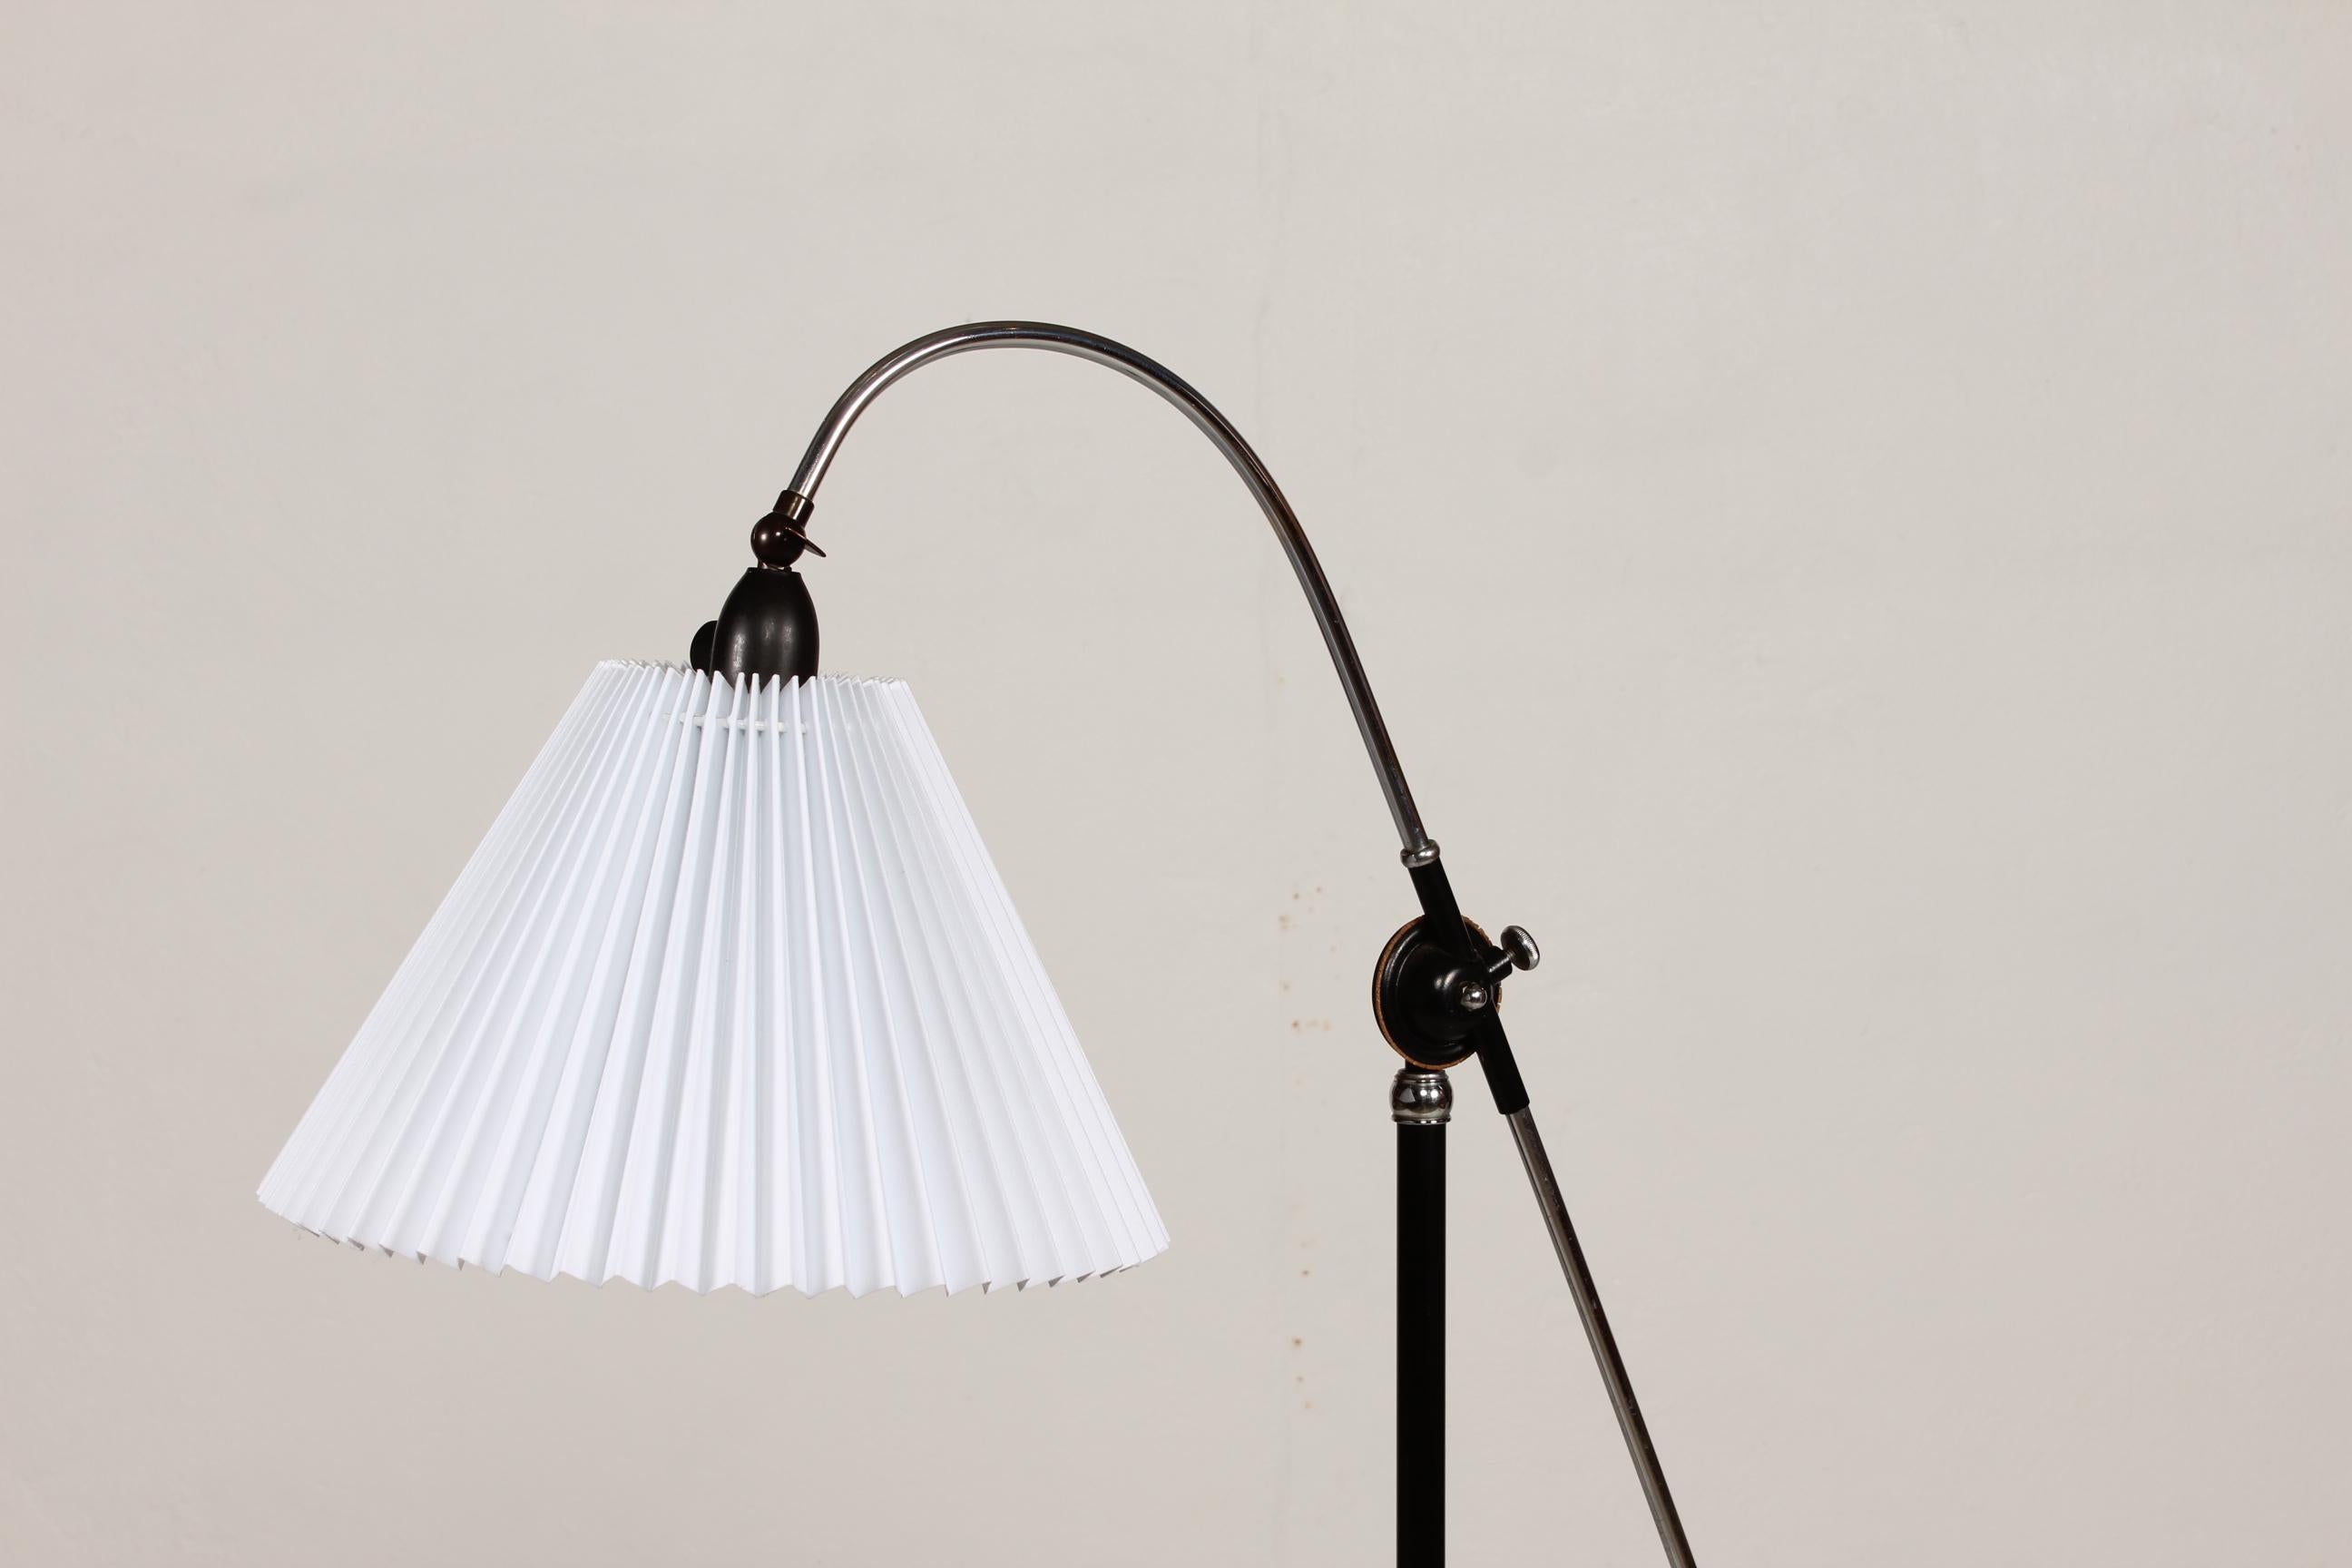 Danish modern floor lamp from the 1950s made of chrome-plated and black lacquered metal with a lamp base of cast iron. 
The new white pleated lamp shade is adjustable
The minimum height of the lamp is 148 cm. The diameter of the shade is 31